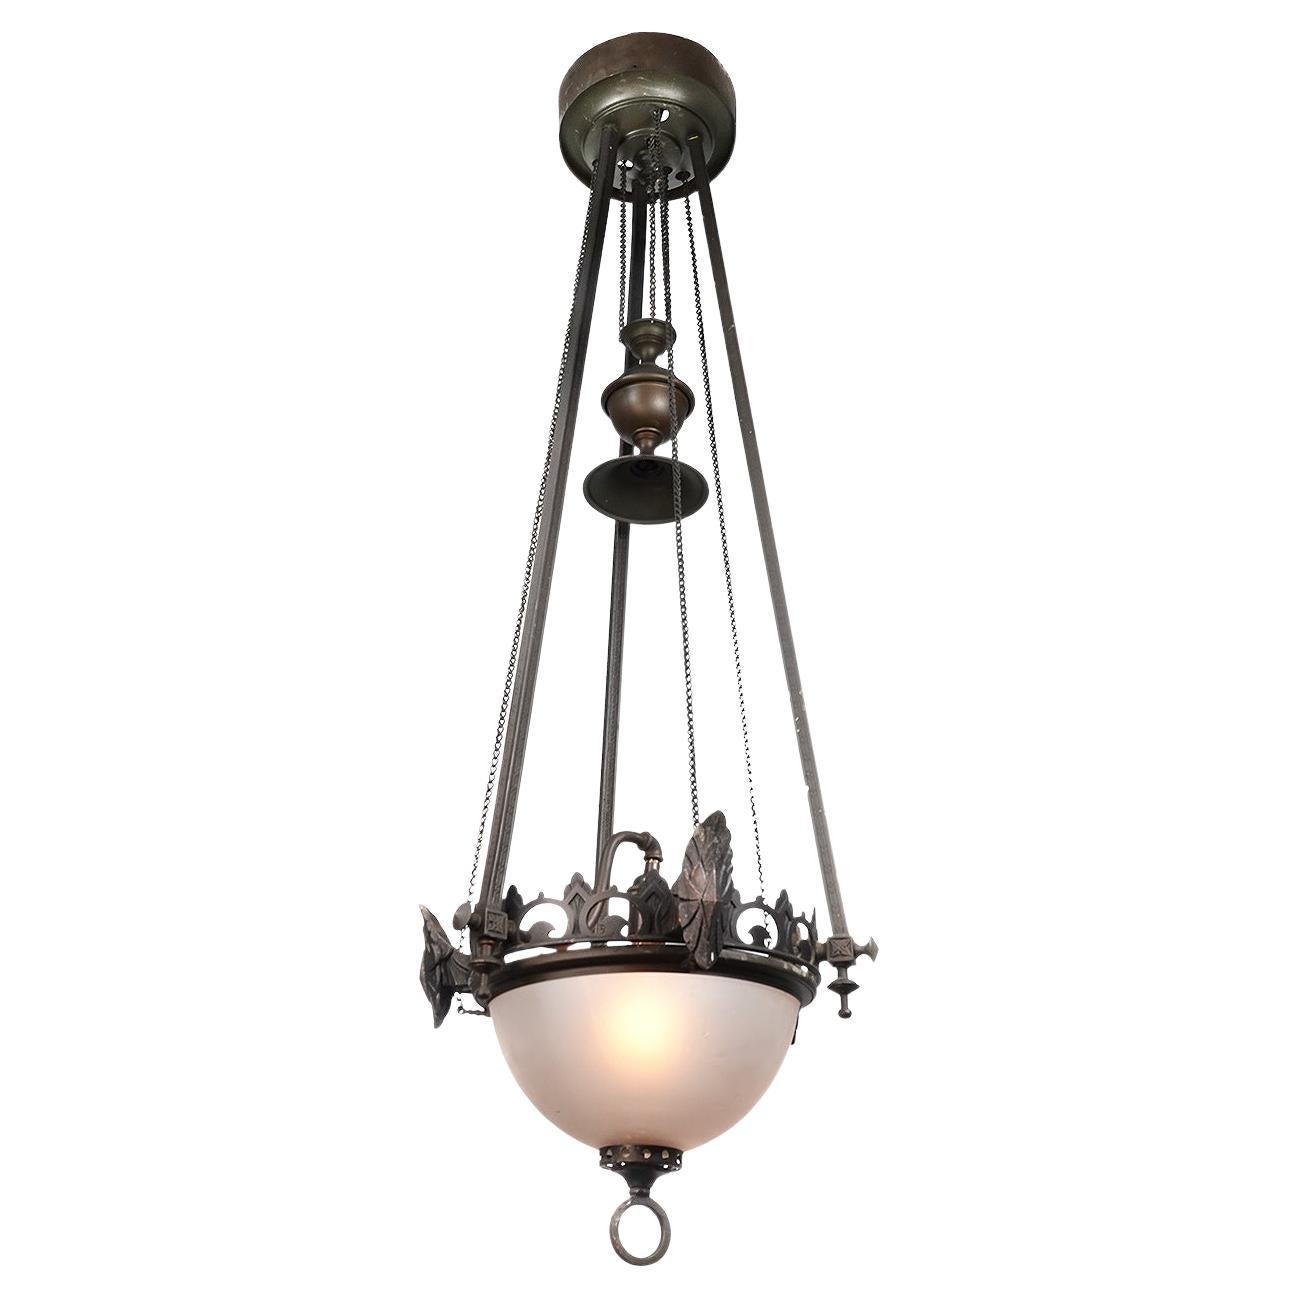 Original 3 Chain Pull Down Gas Lamp, Newly Wired